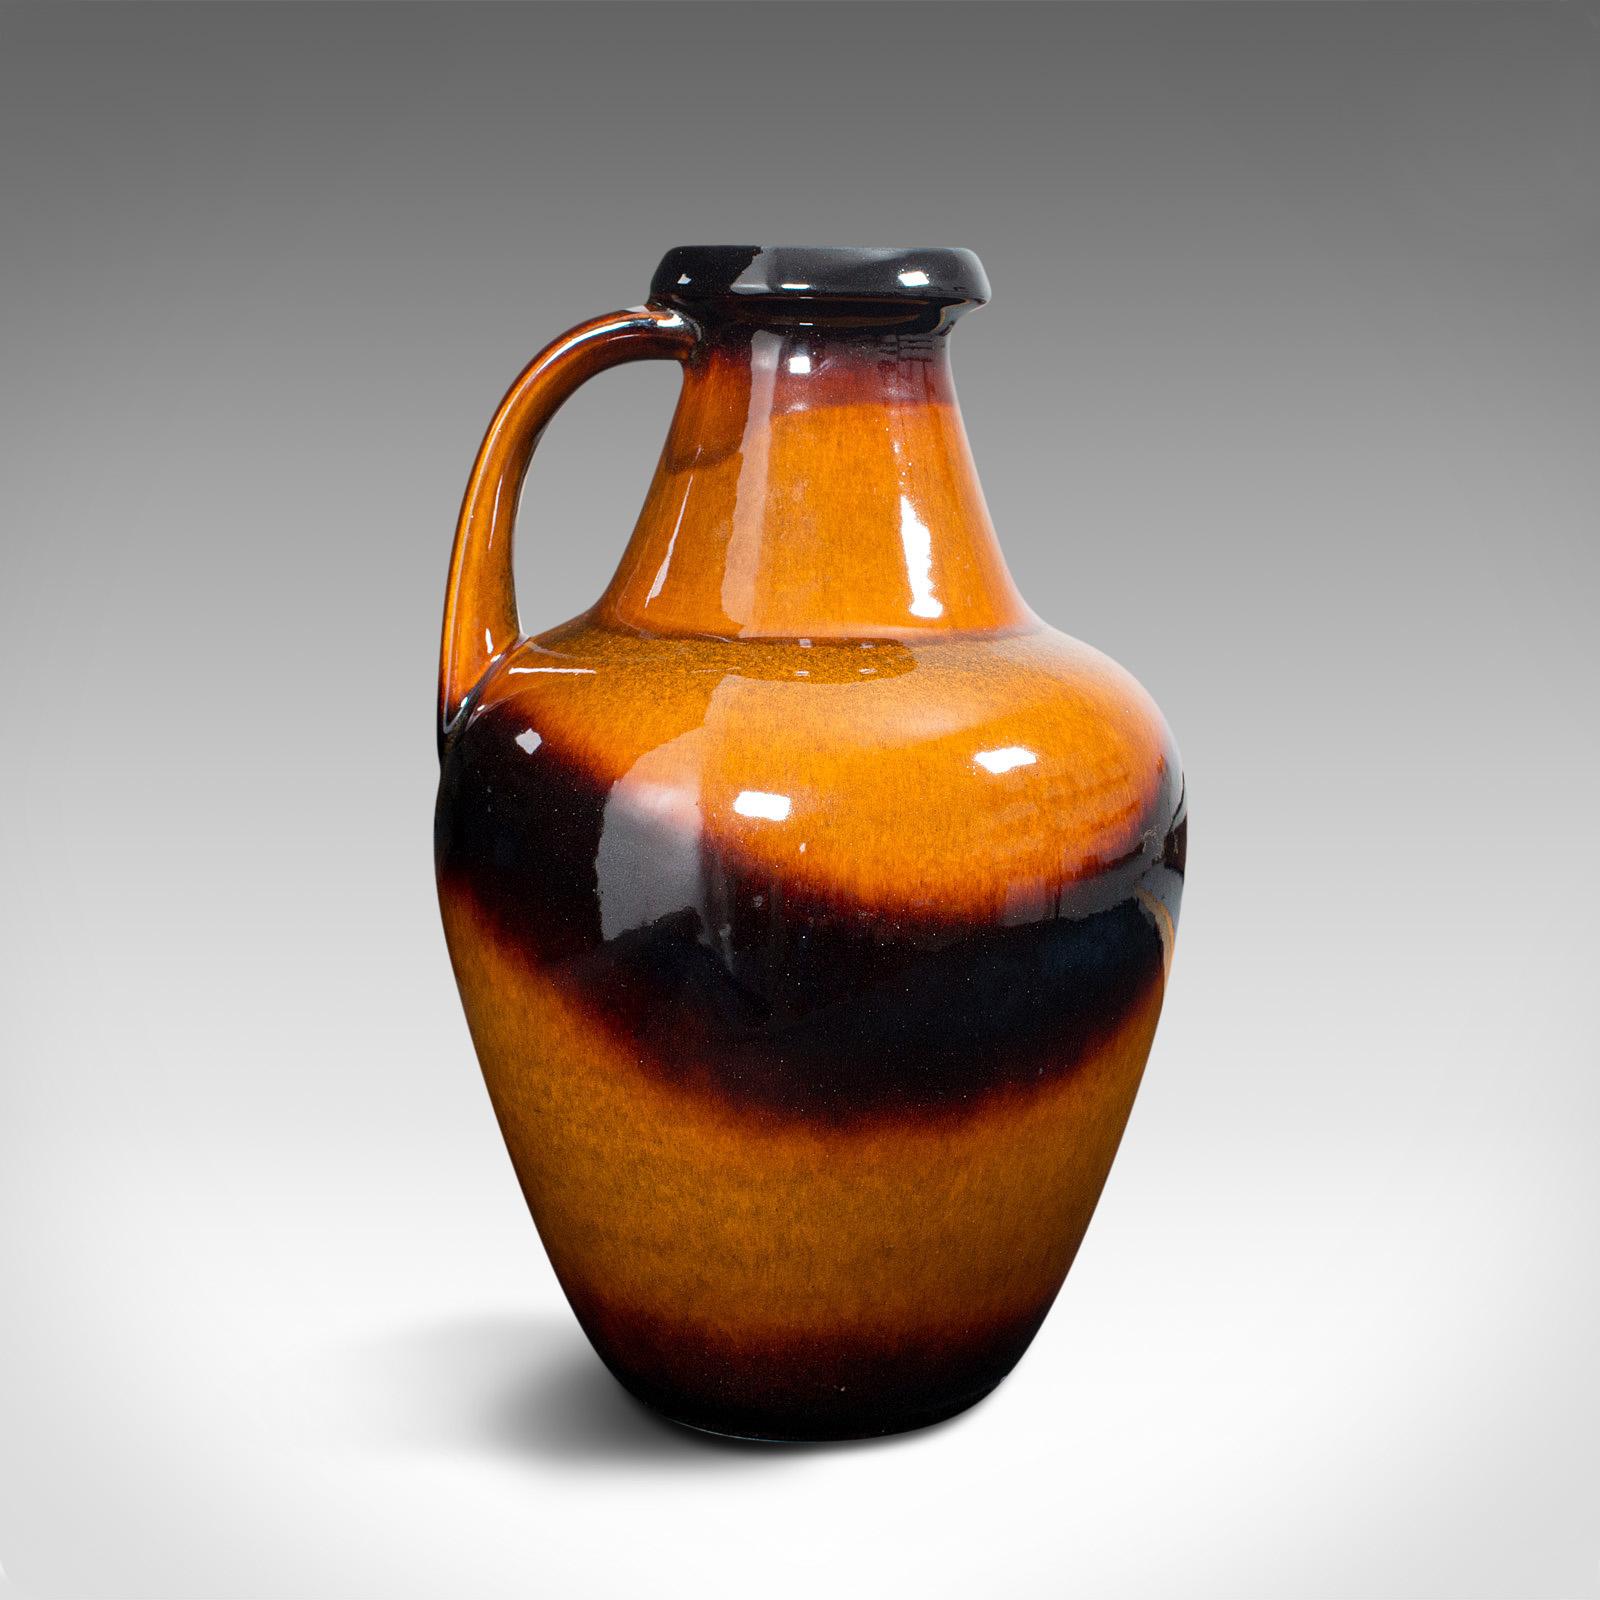 This is a large vintage decorative amphora. A German, ceramic serving jug or vase, dating to the late 20th century, circa 1970.

Striking, bright example of West German lava ceramics
Displaying a desirable aged patina, free of cracks or